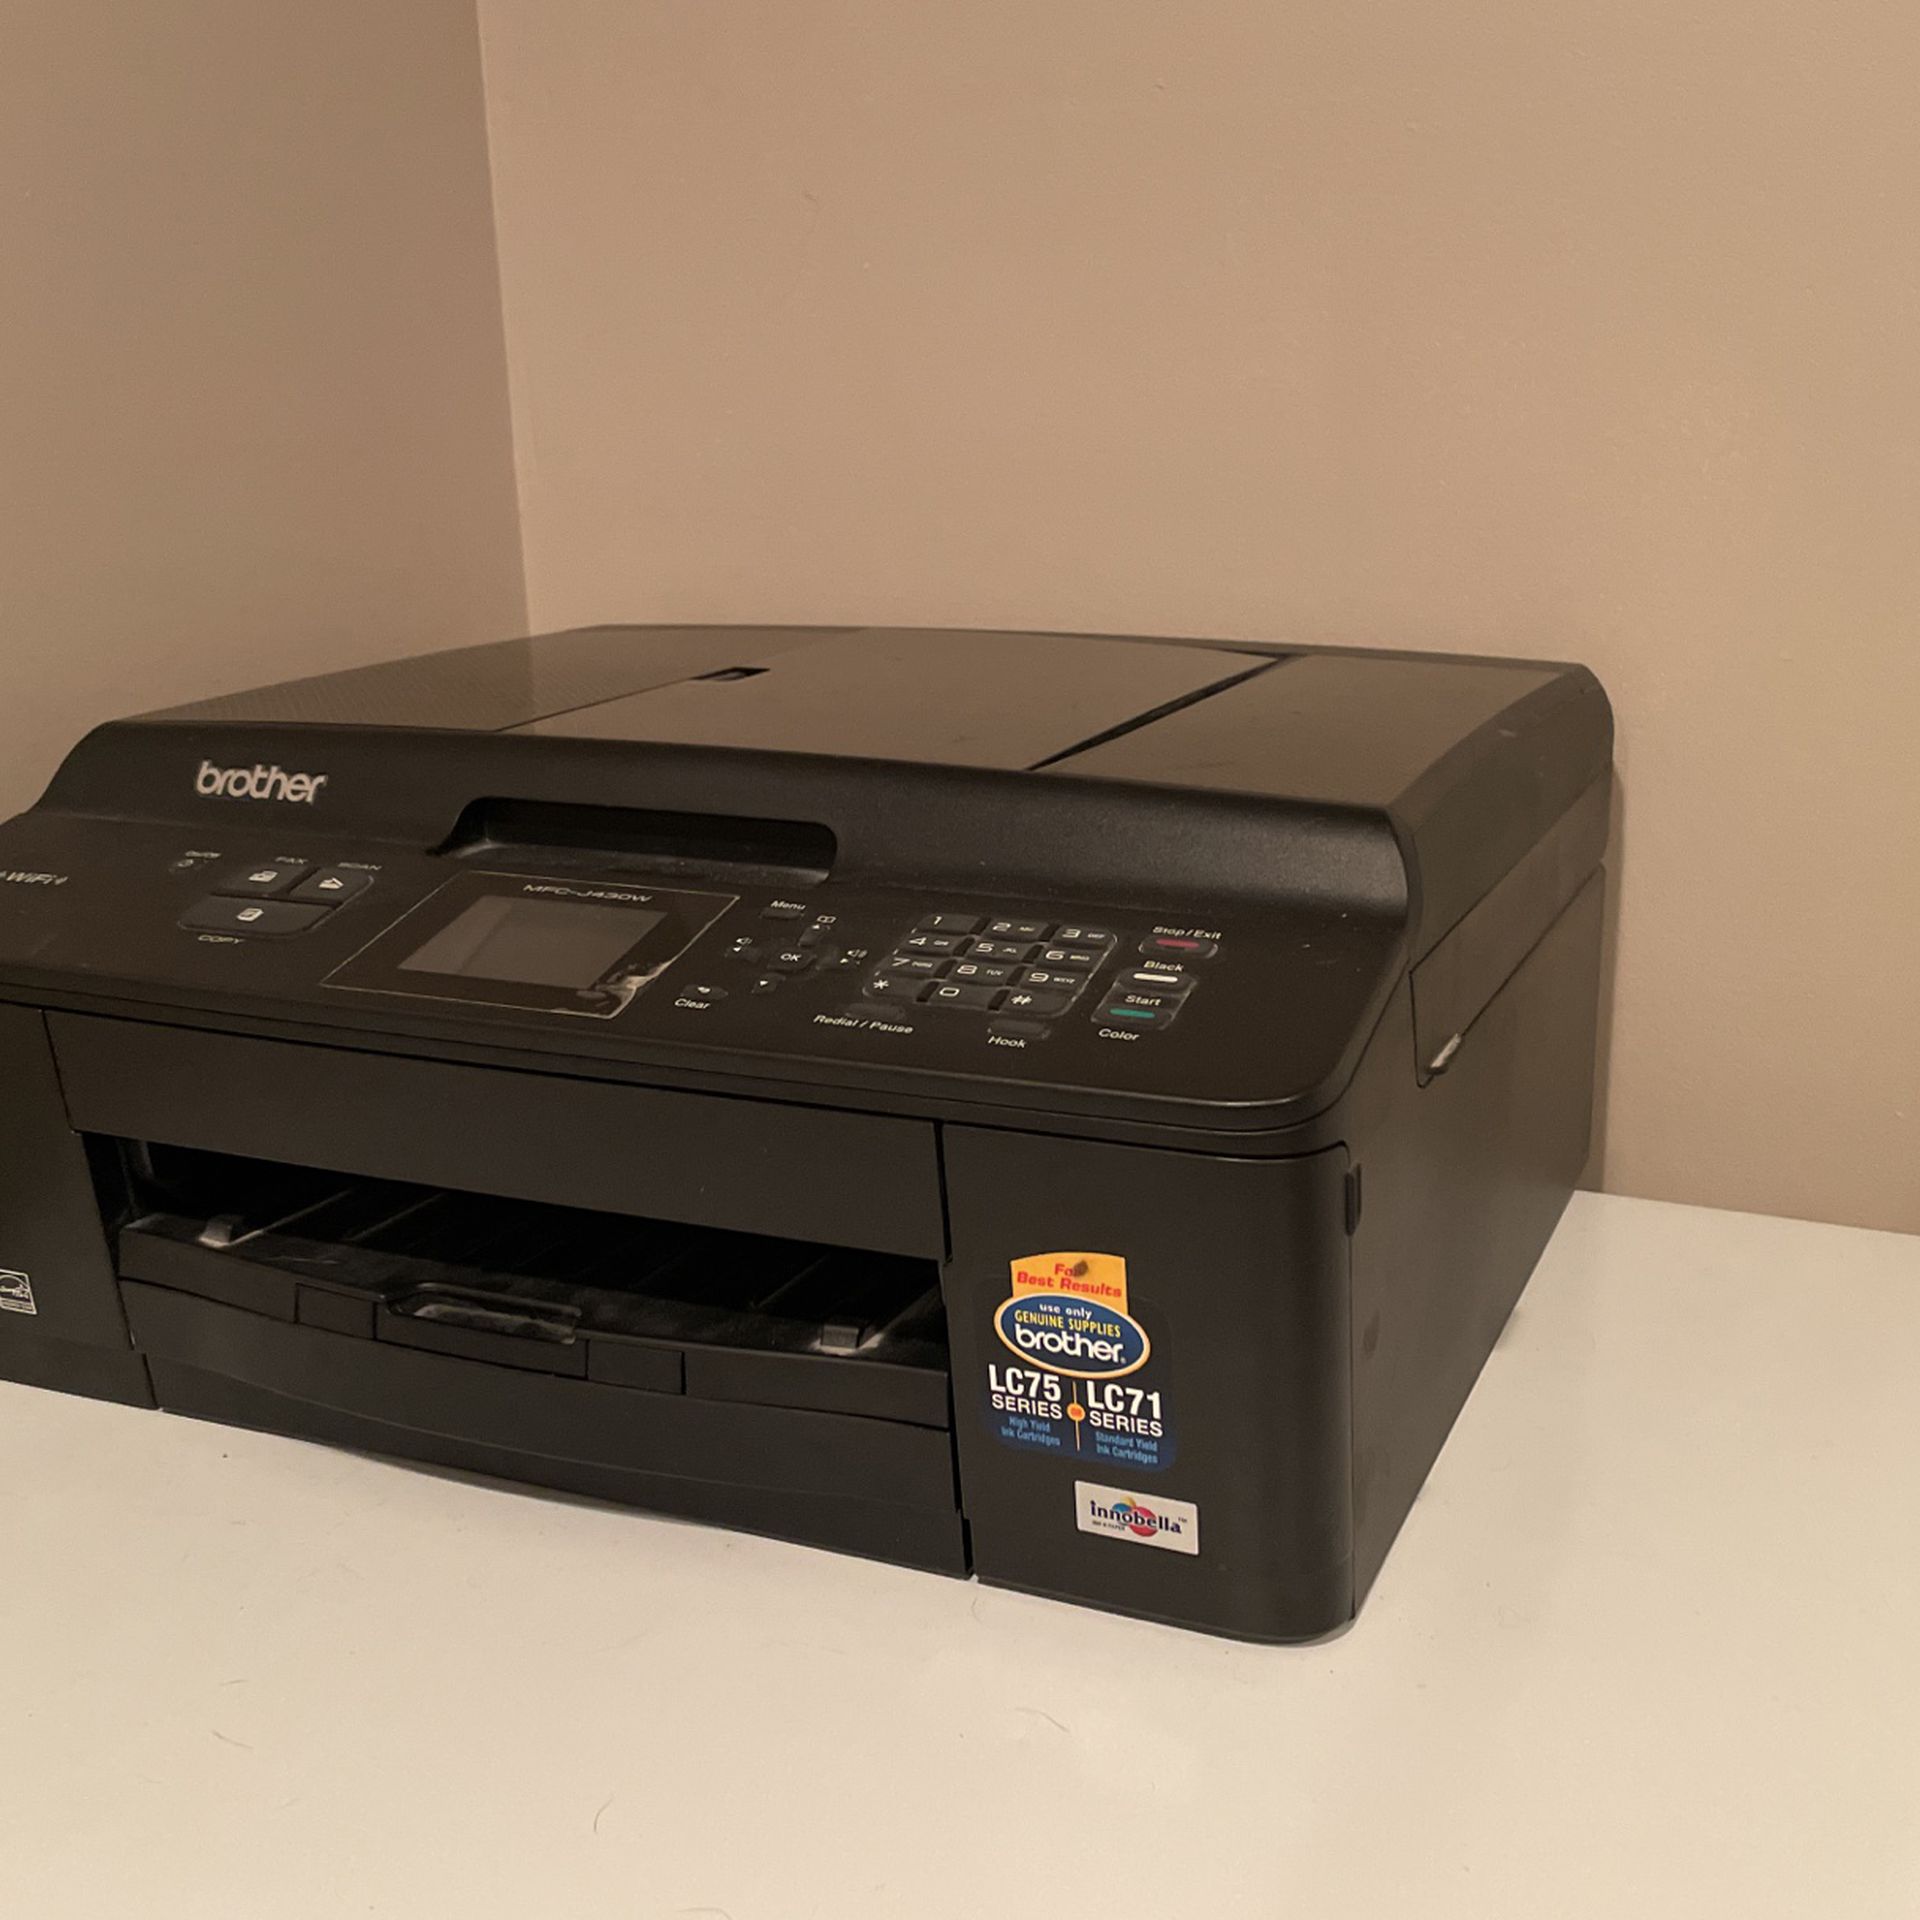 Brother MFC-J430W plus spare ink (needs work)